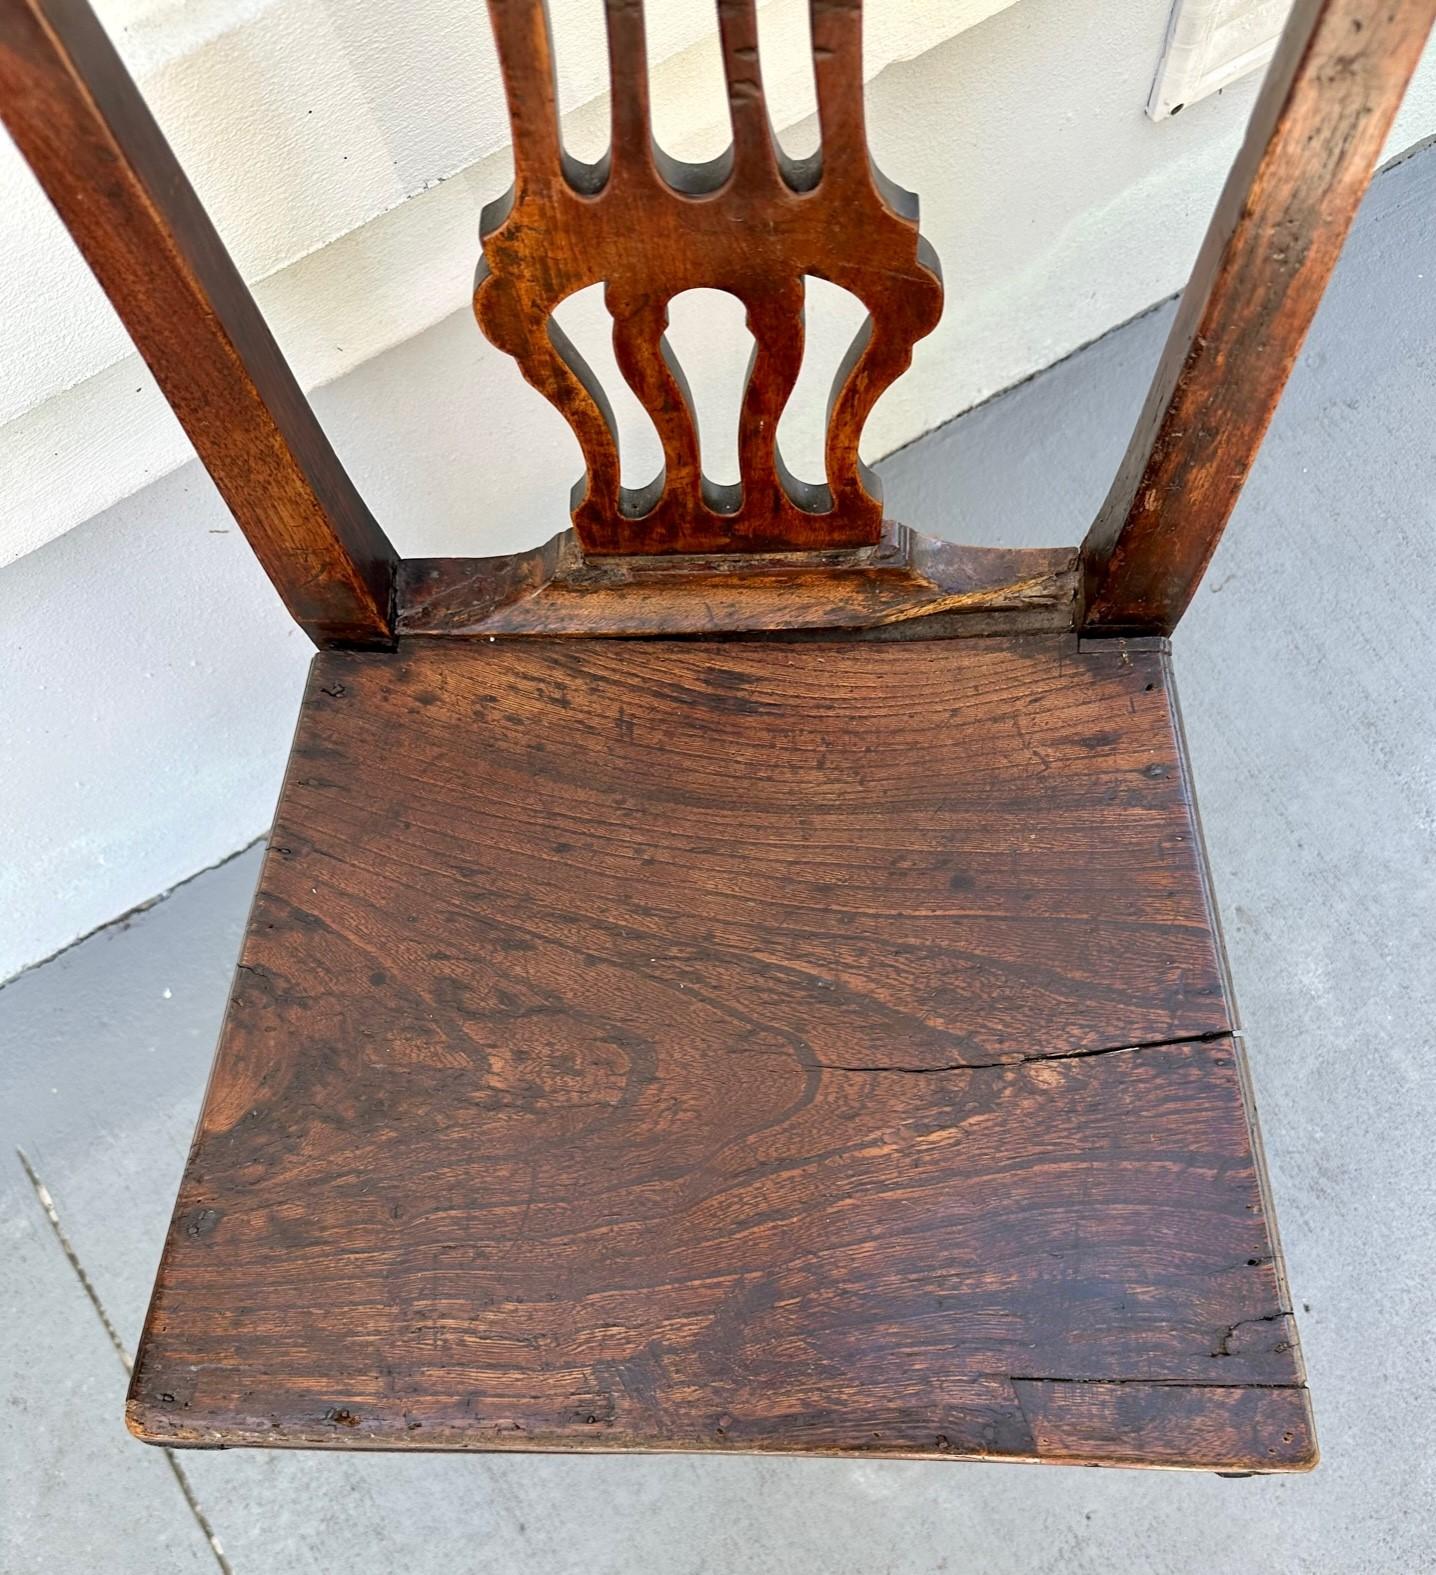 Unique 18th Century Chippendale Chair Family Heirloom, Extensive Repair.

This chair from the American Colonial era fills a special place in the field of antiques. Obviously, the owner refused to discard it.  The chair underwent a series of repairs